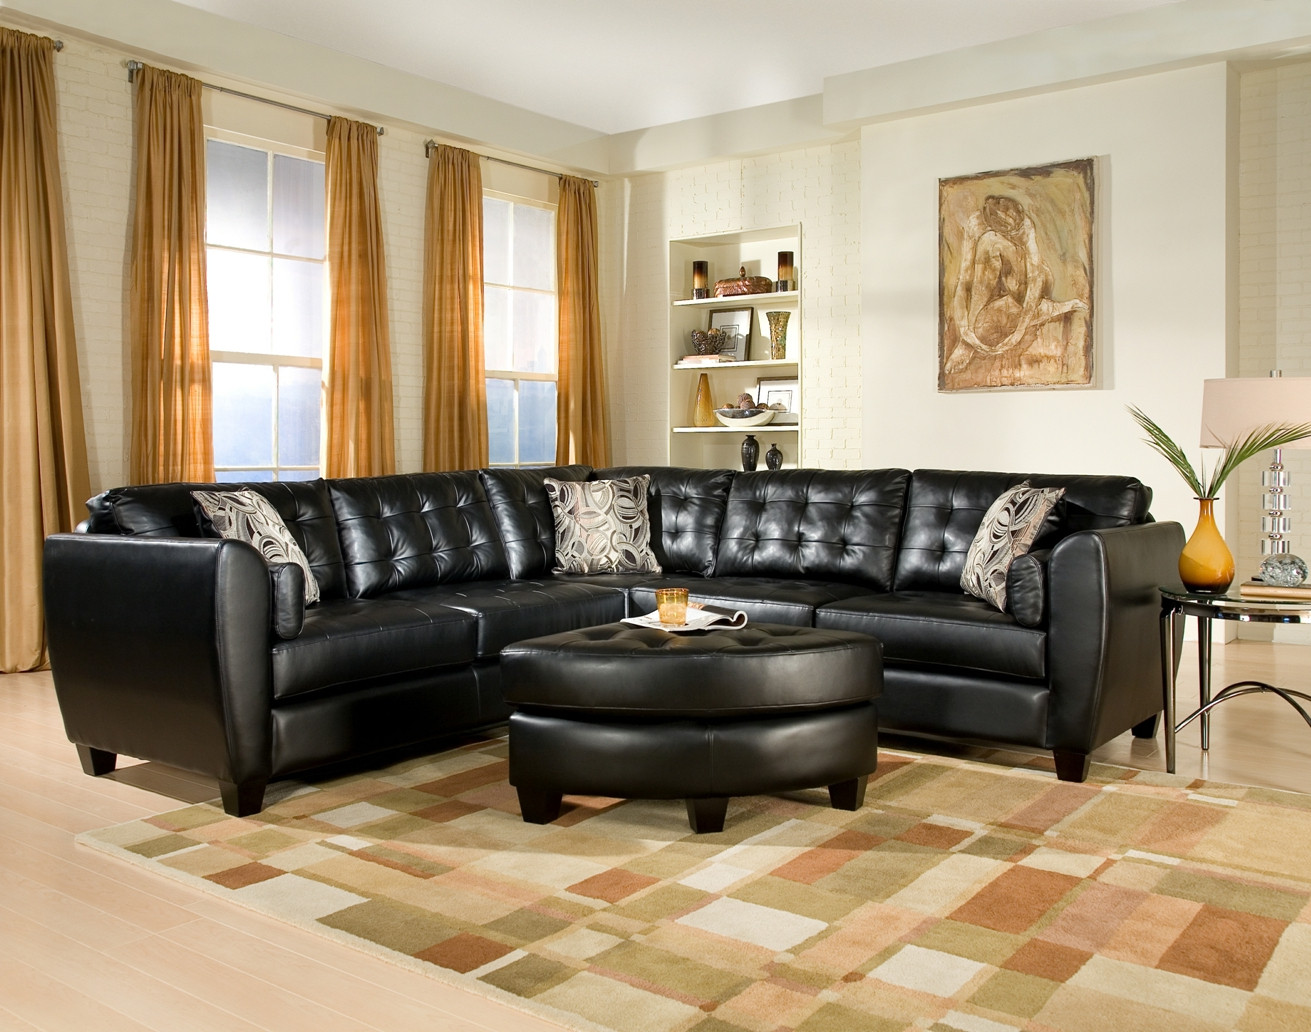 Modern Living Room Sectionals
 Living Room Ideas with Sectionals Sofa for Small Living